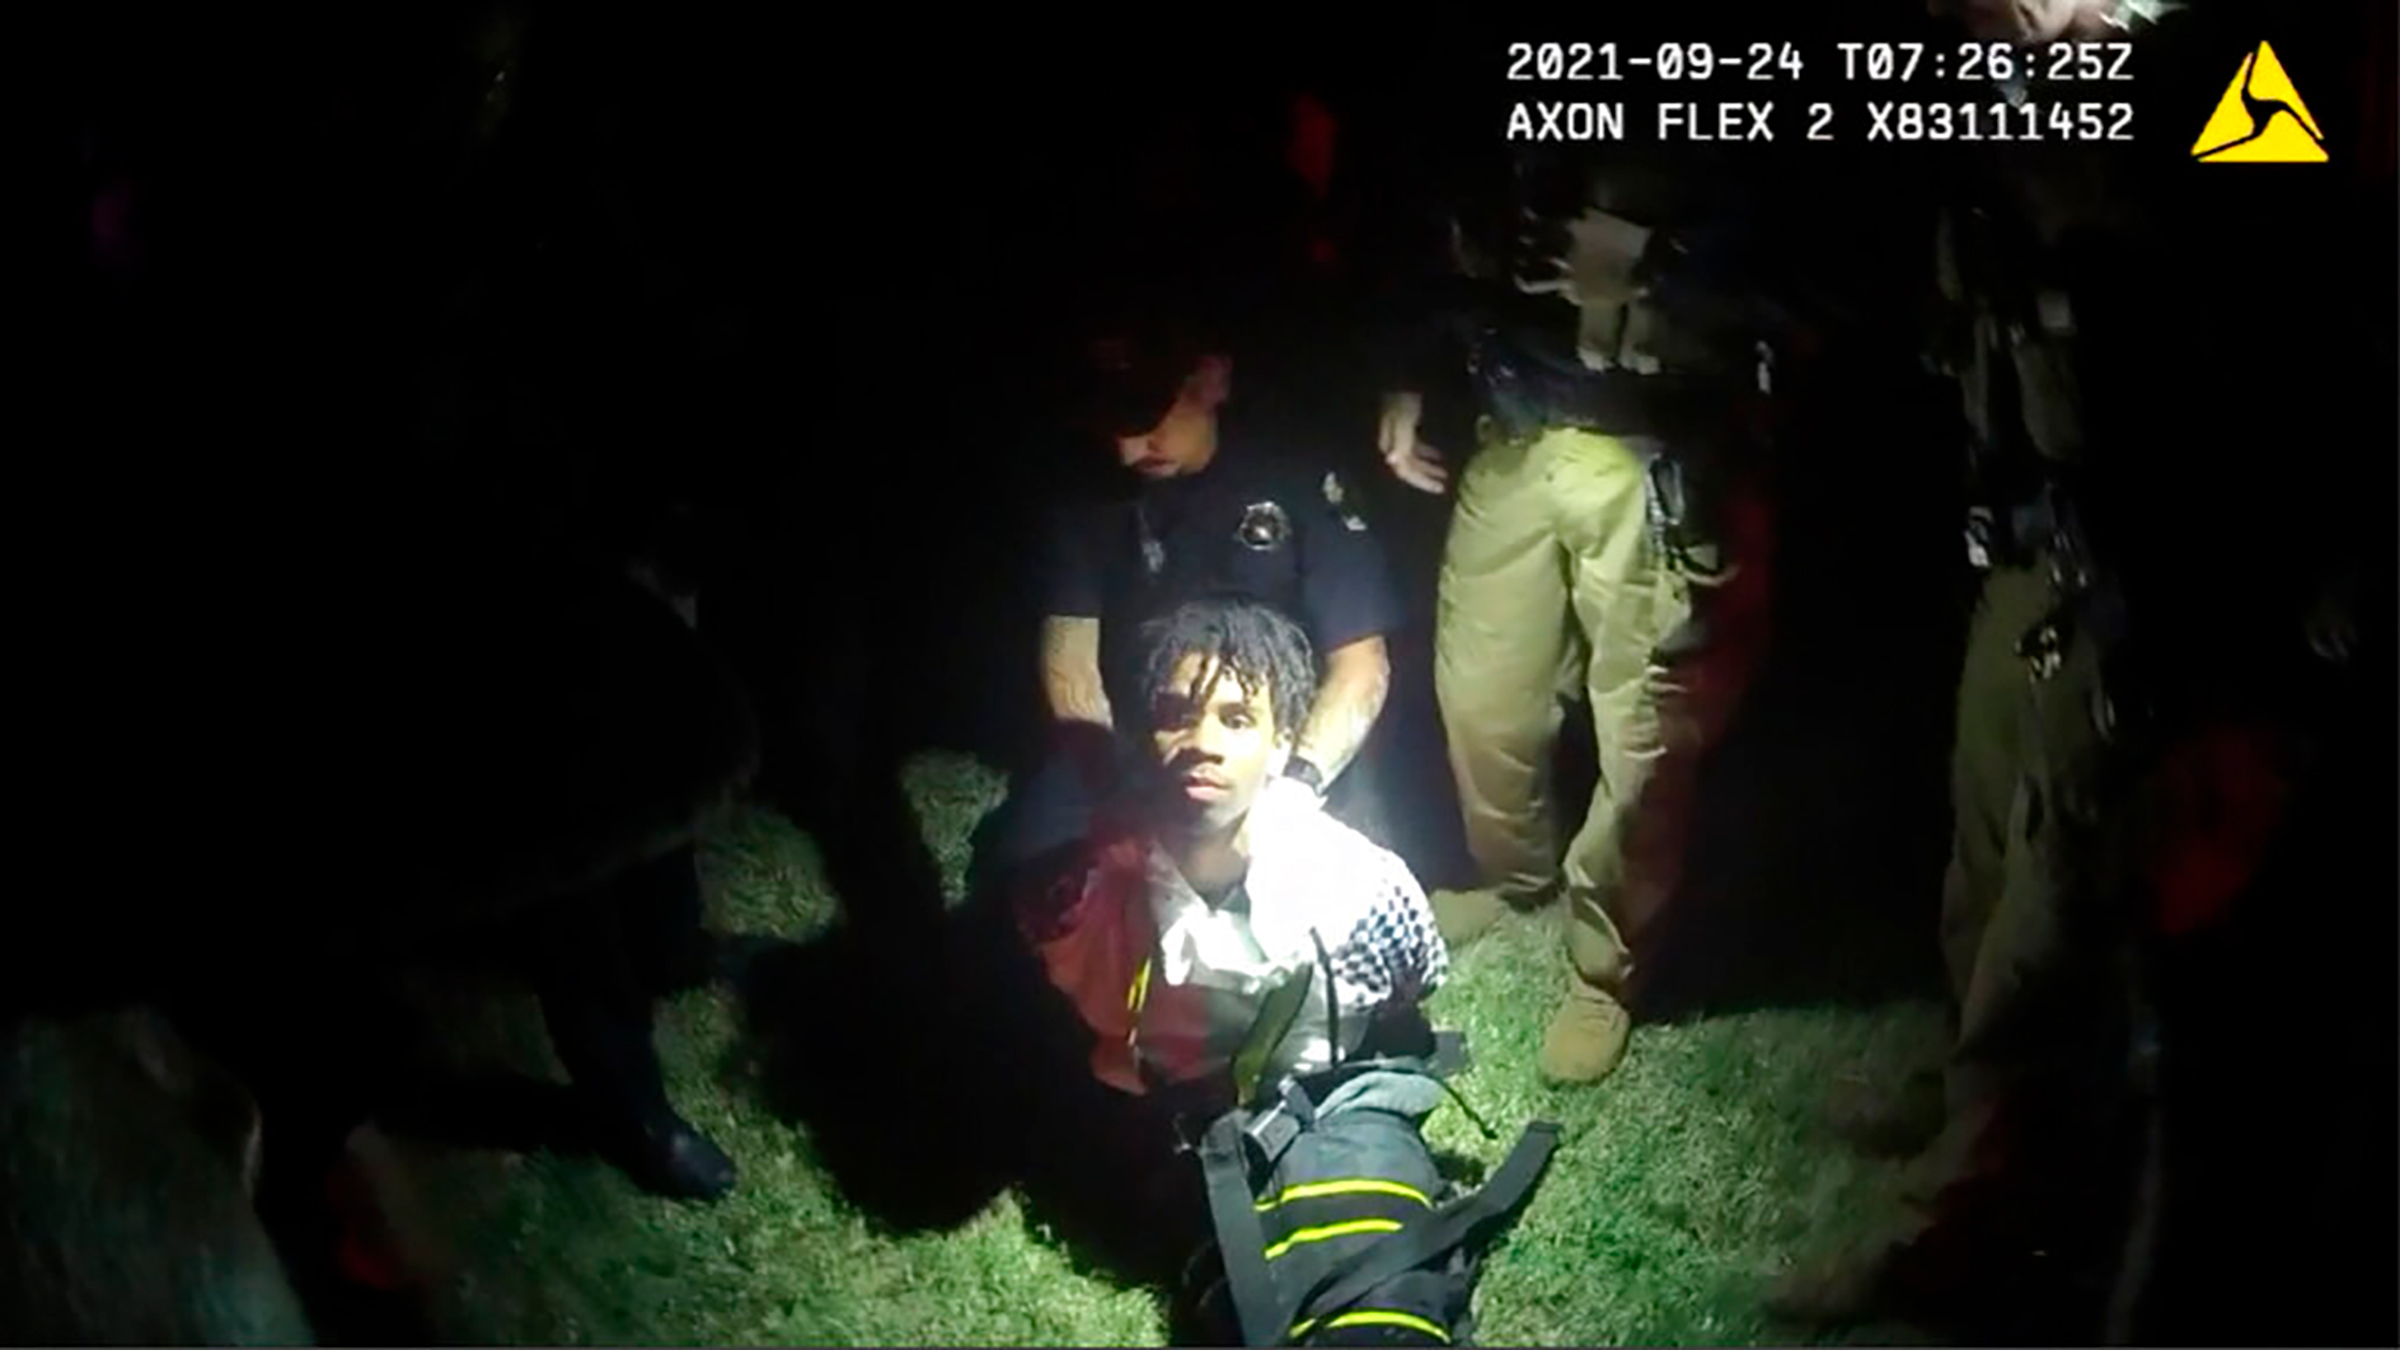 In this image from body camera video provided by Sedgwick County, police put Cedric "C.J." Lofton, 17, into a body-length restraining device called a WRAP outside his home in Wichita, Kan., on Sept. 24, 2021. The death of the Black teenager at a Kansas juvenile detention center was foreshadowed five years earlier by a state inspection of the facility that noted systemic deficiencies in its handling of children with mental health issues, according to a federal civil rights lawsuit filed June 13, 2022. (Sedgwick County/AP)